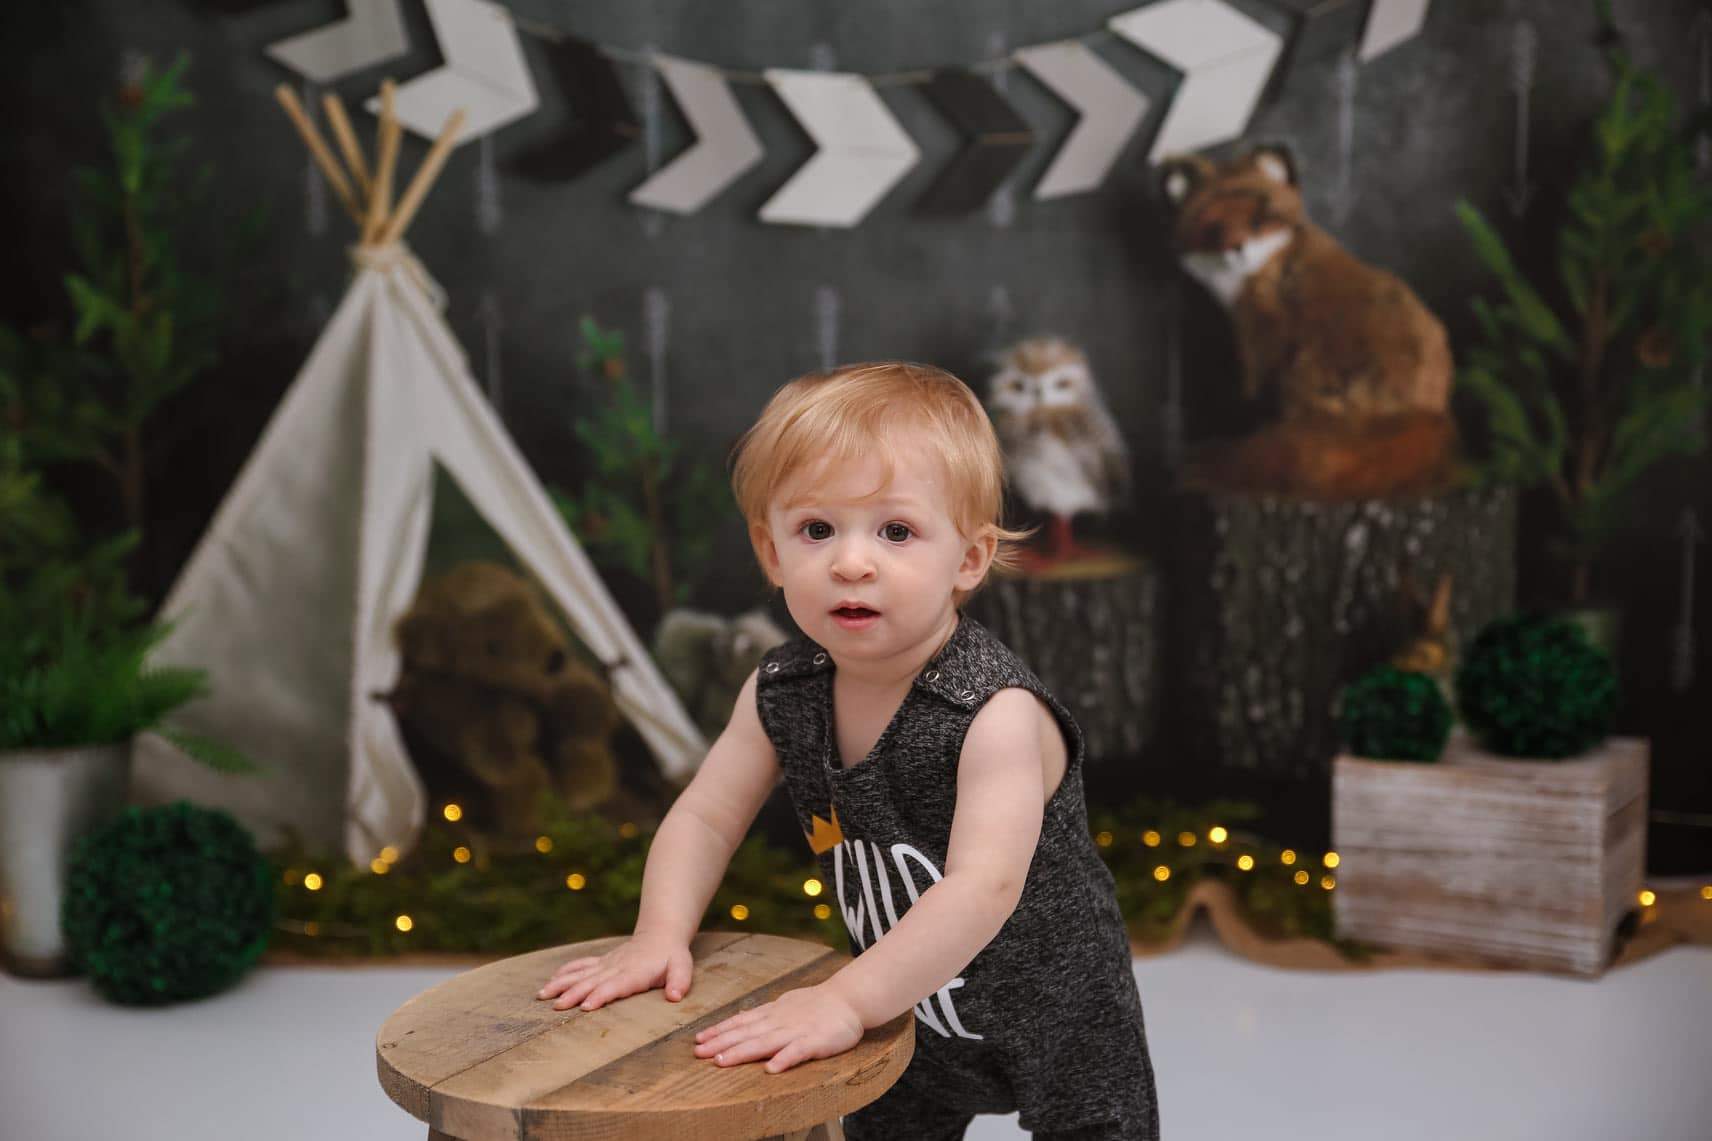 Kate Wild Birthday with Animals Children Backdrop Designed By Mandy Ringe Photography - Kate Backdrop